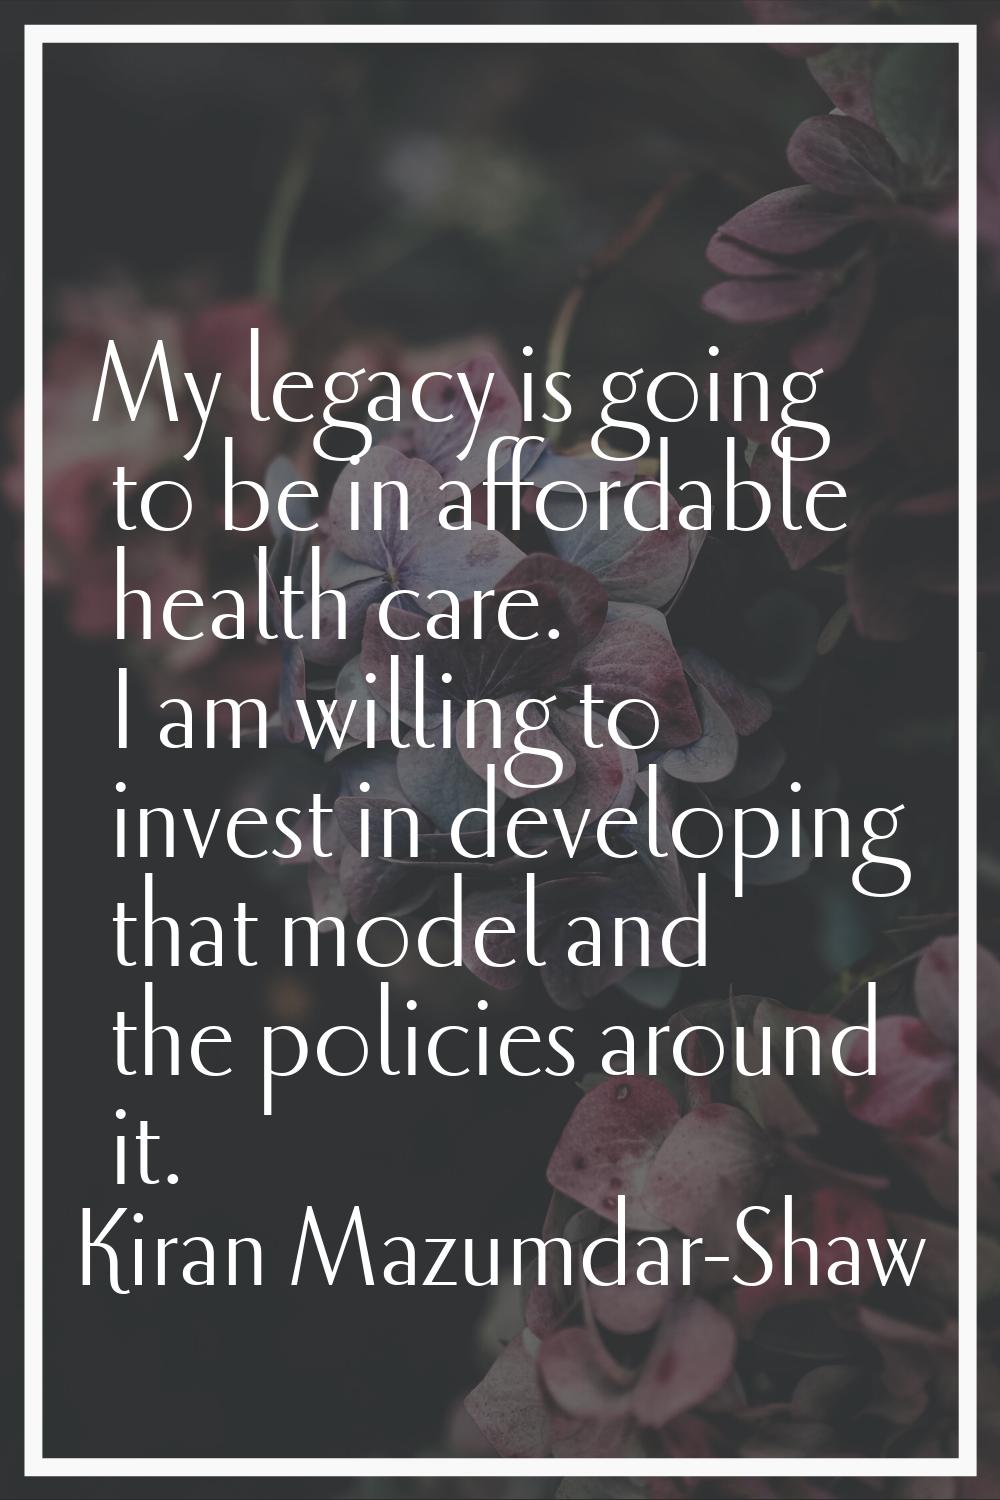 My legacy is going to be in affordable health care. I am willing to invest in developing that model